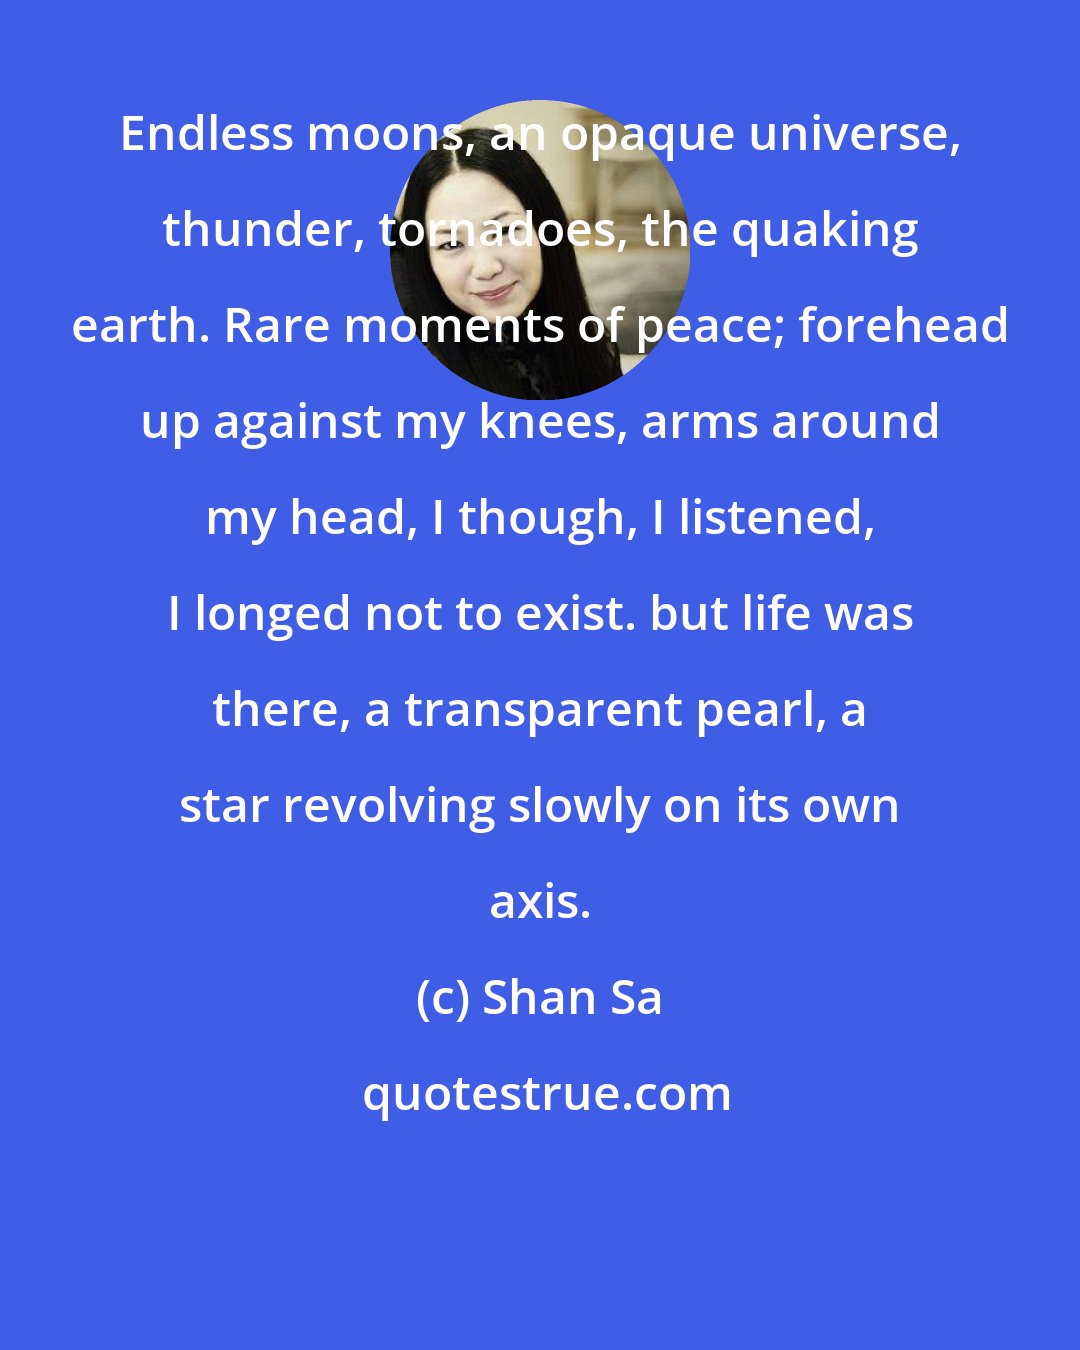 Shan Sa: Endless moons, an opaque universe, thunder, tornadoes, the quaking earth. Rare moments of peace; forehead up against my knees, arms around my head, I though, I listened, I longed not to exist. but life was there, a transparent pearl, a star revolving slowly on its own axis.